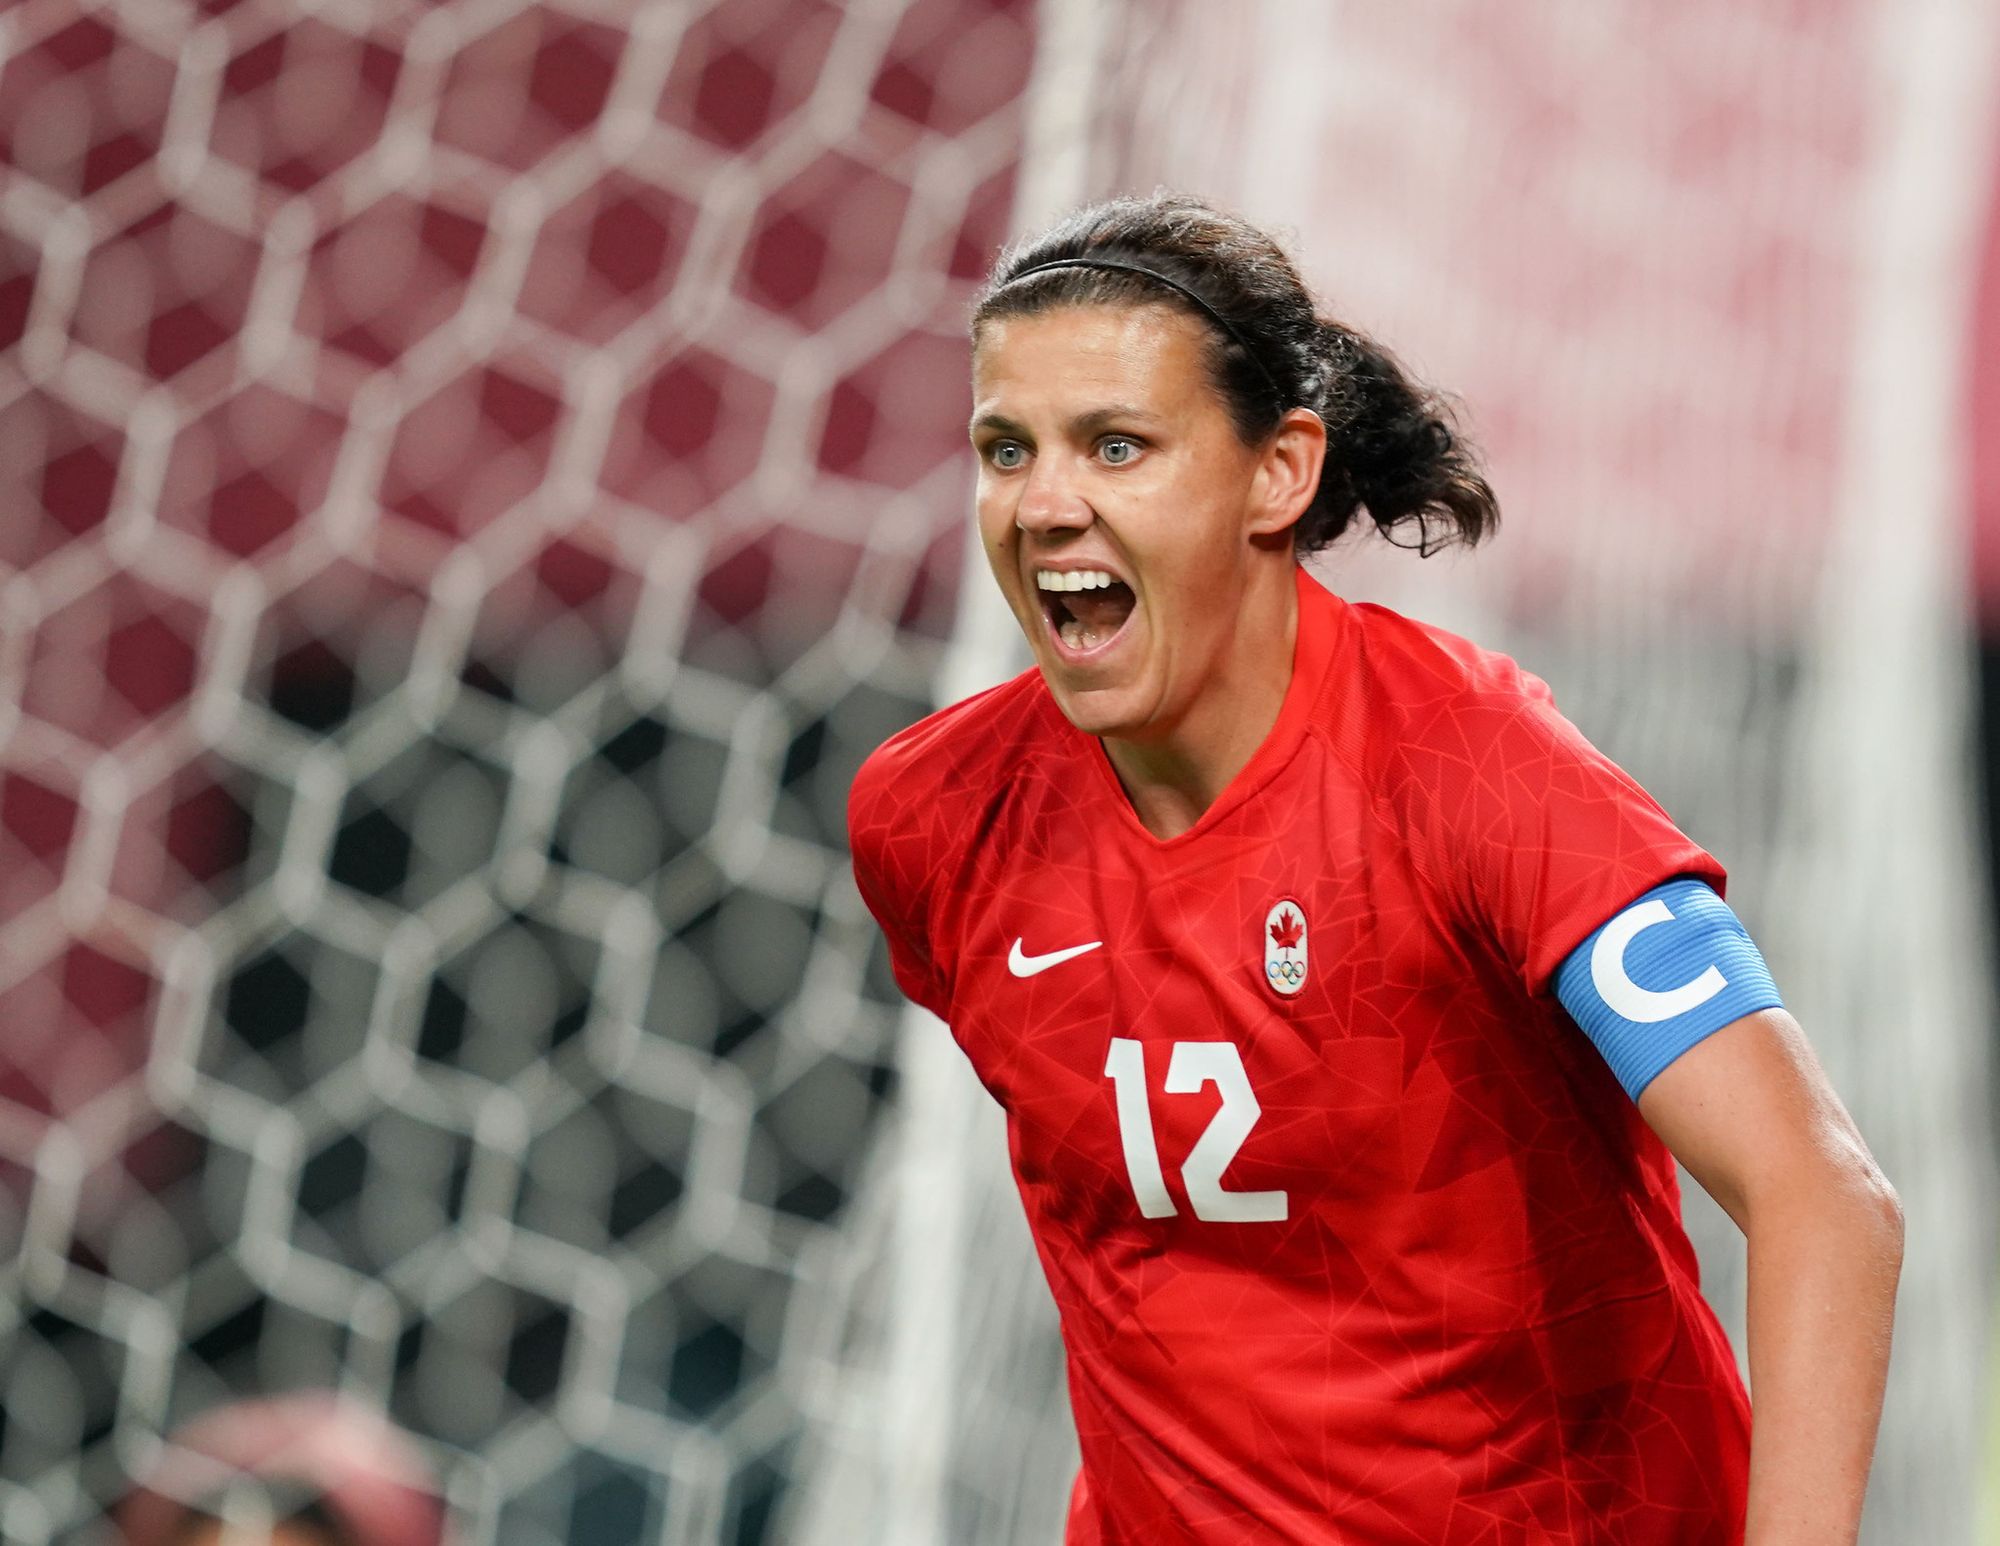 Canada vs. Chile at the Olympics: What you need to know